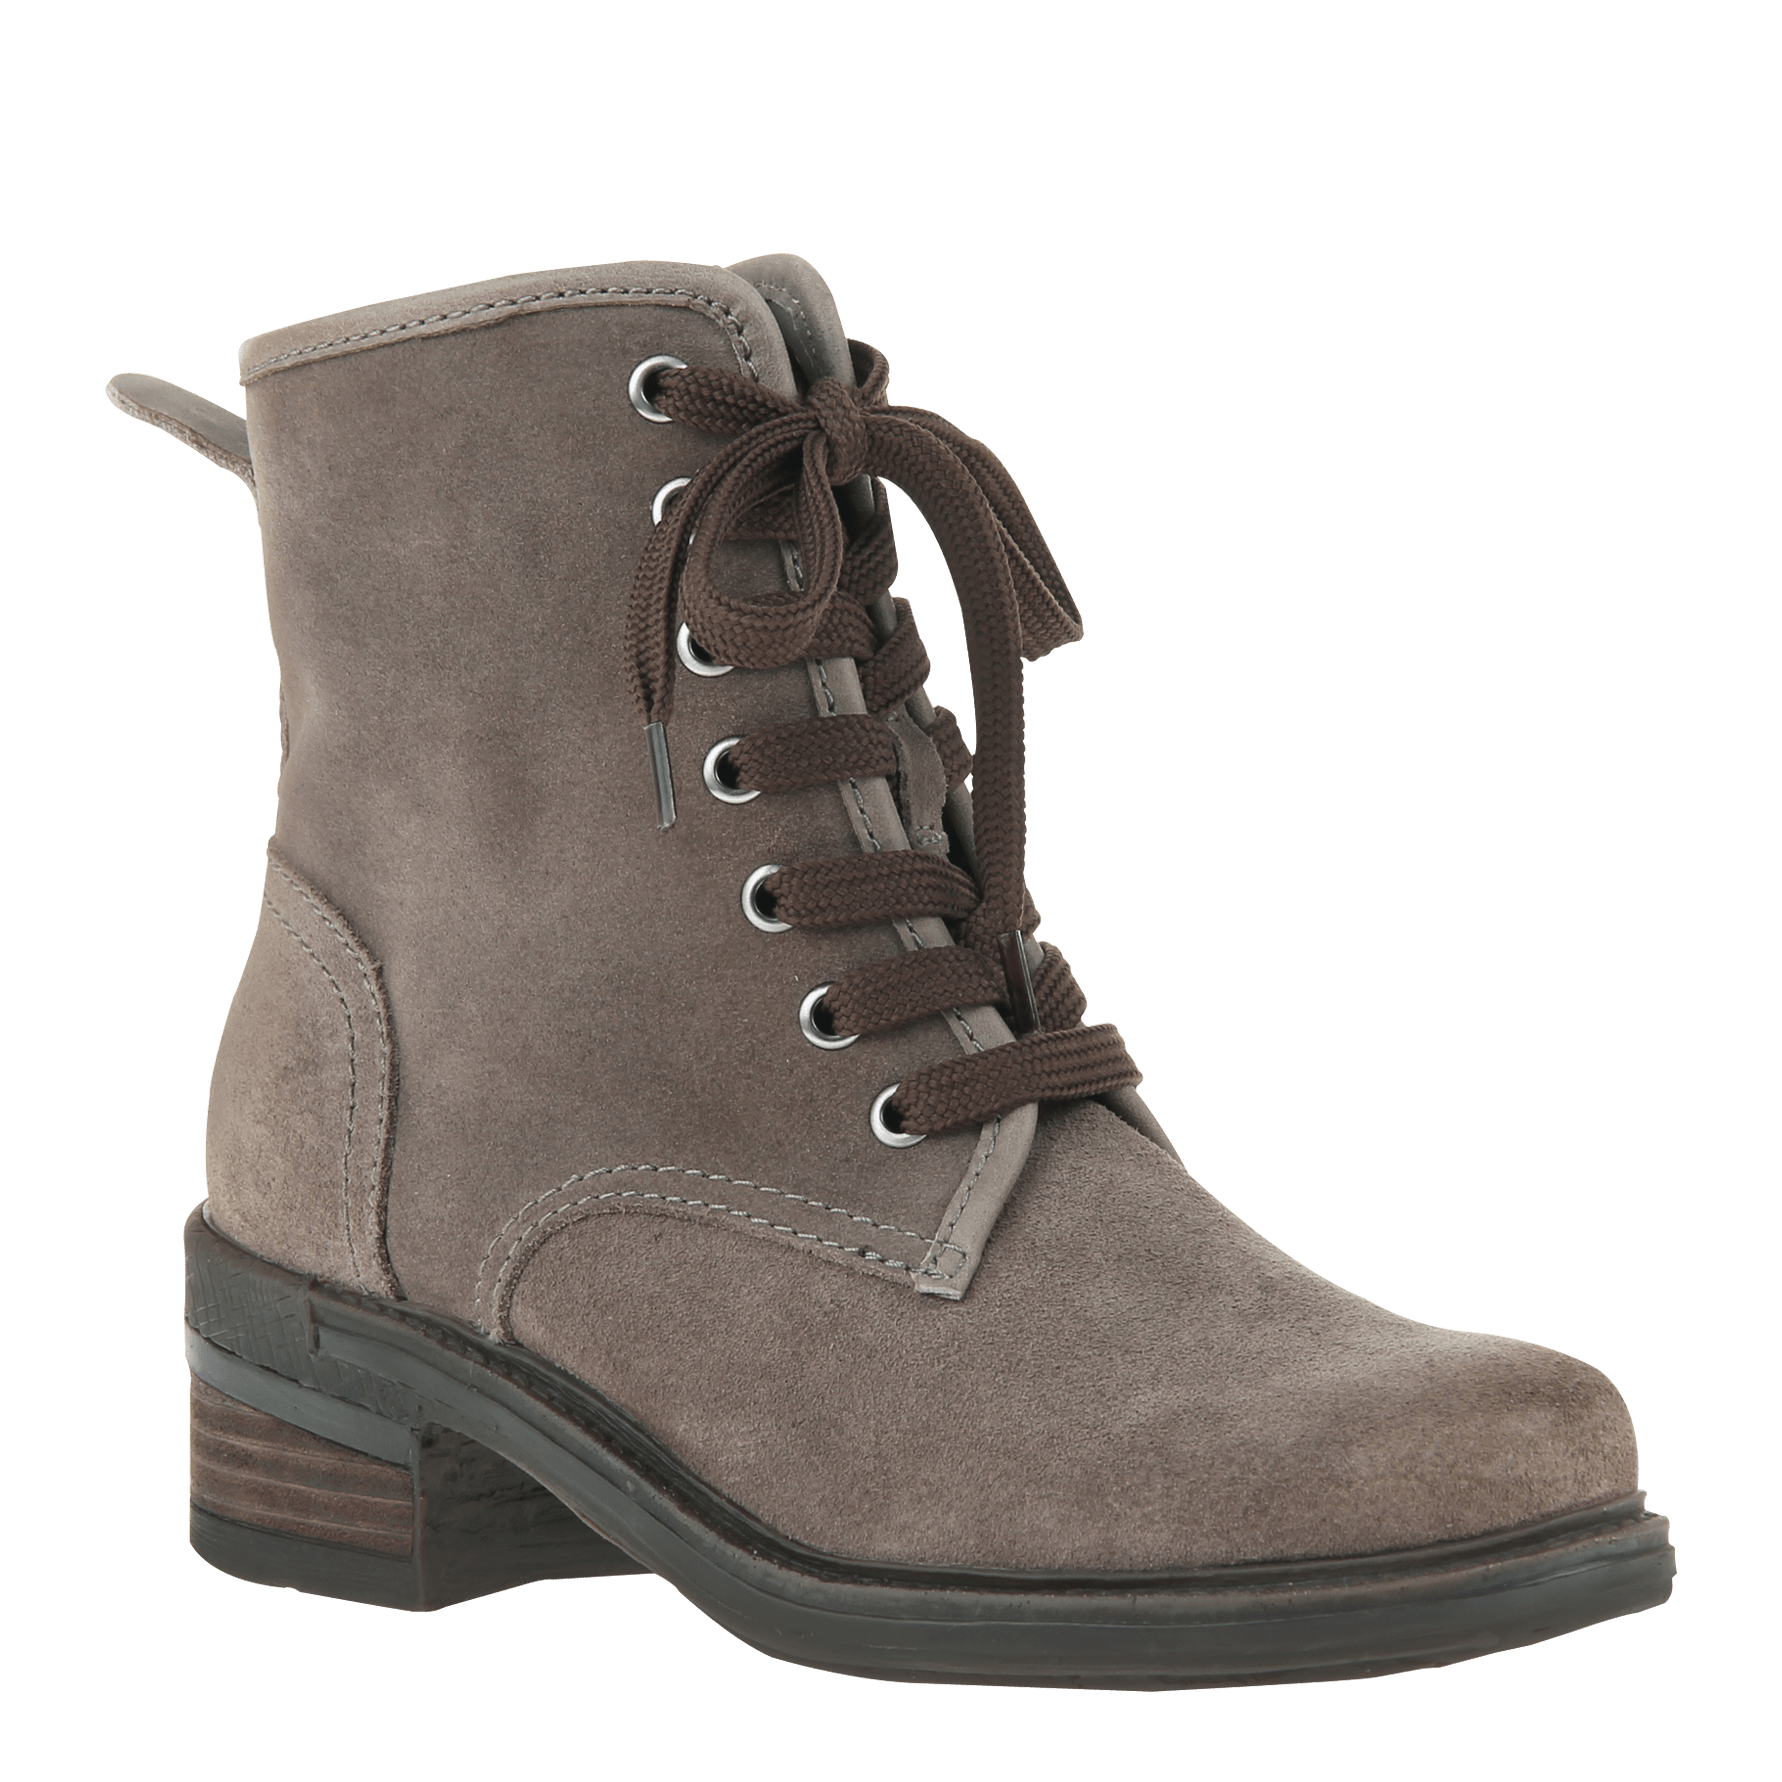 Buy > boot country > in stock